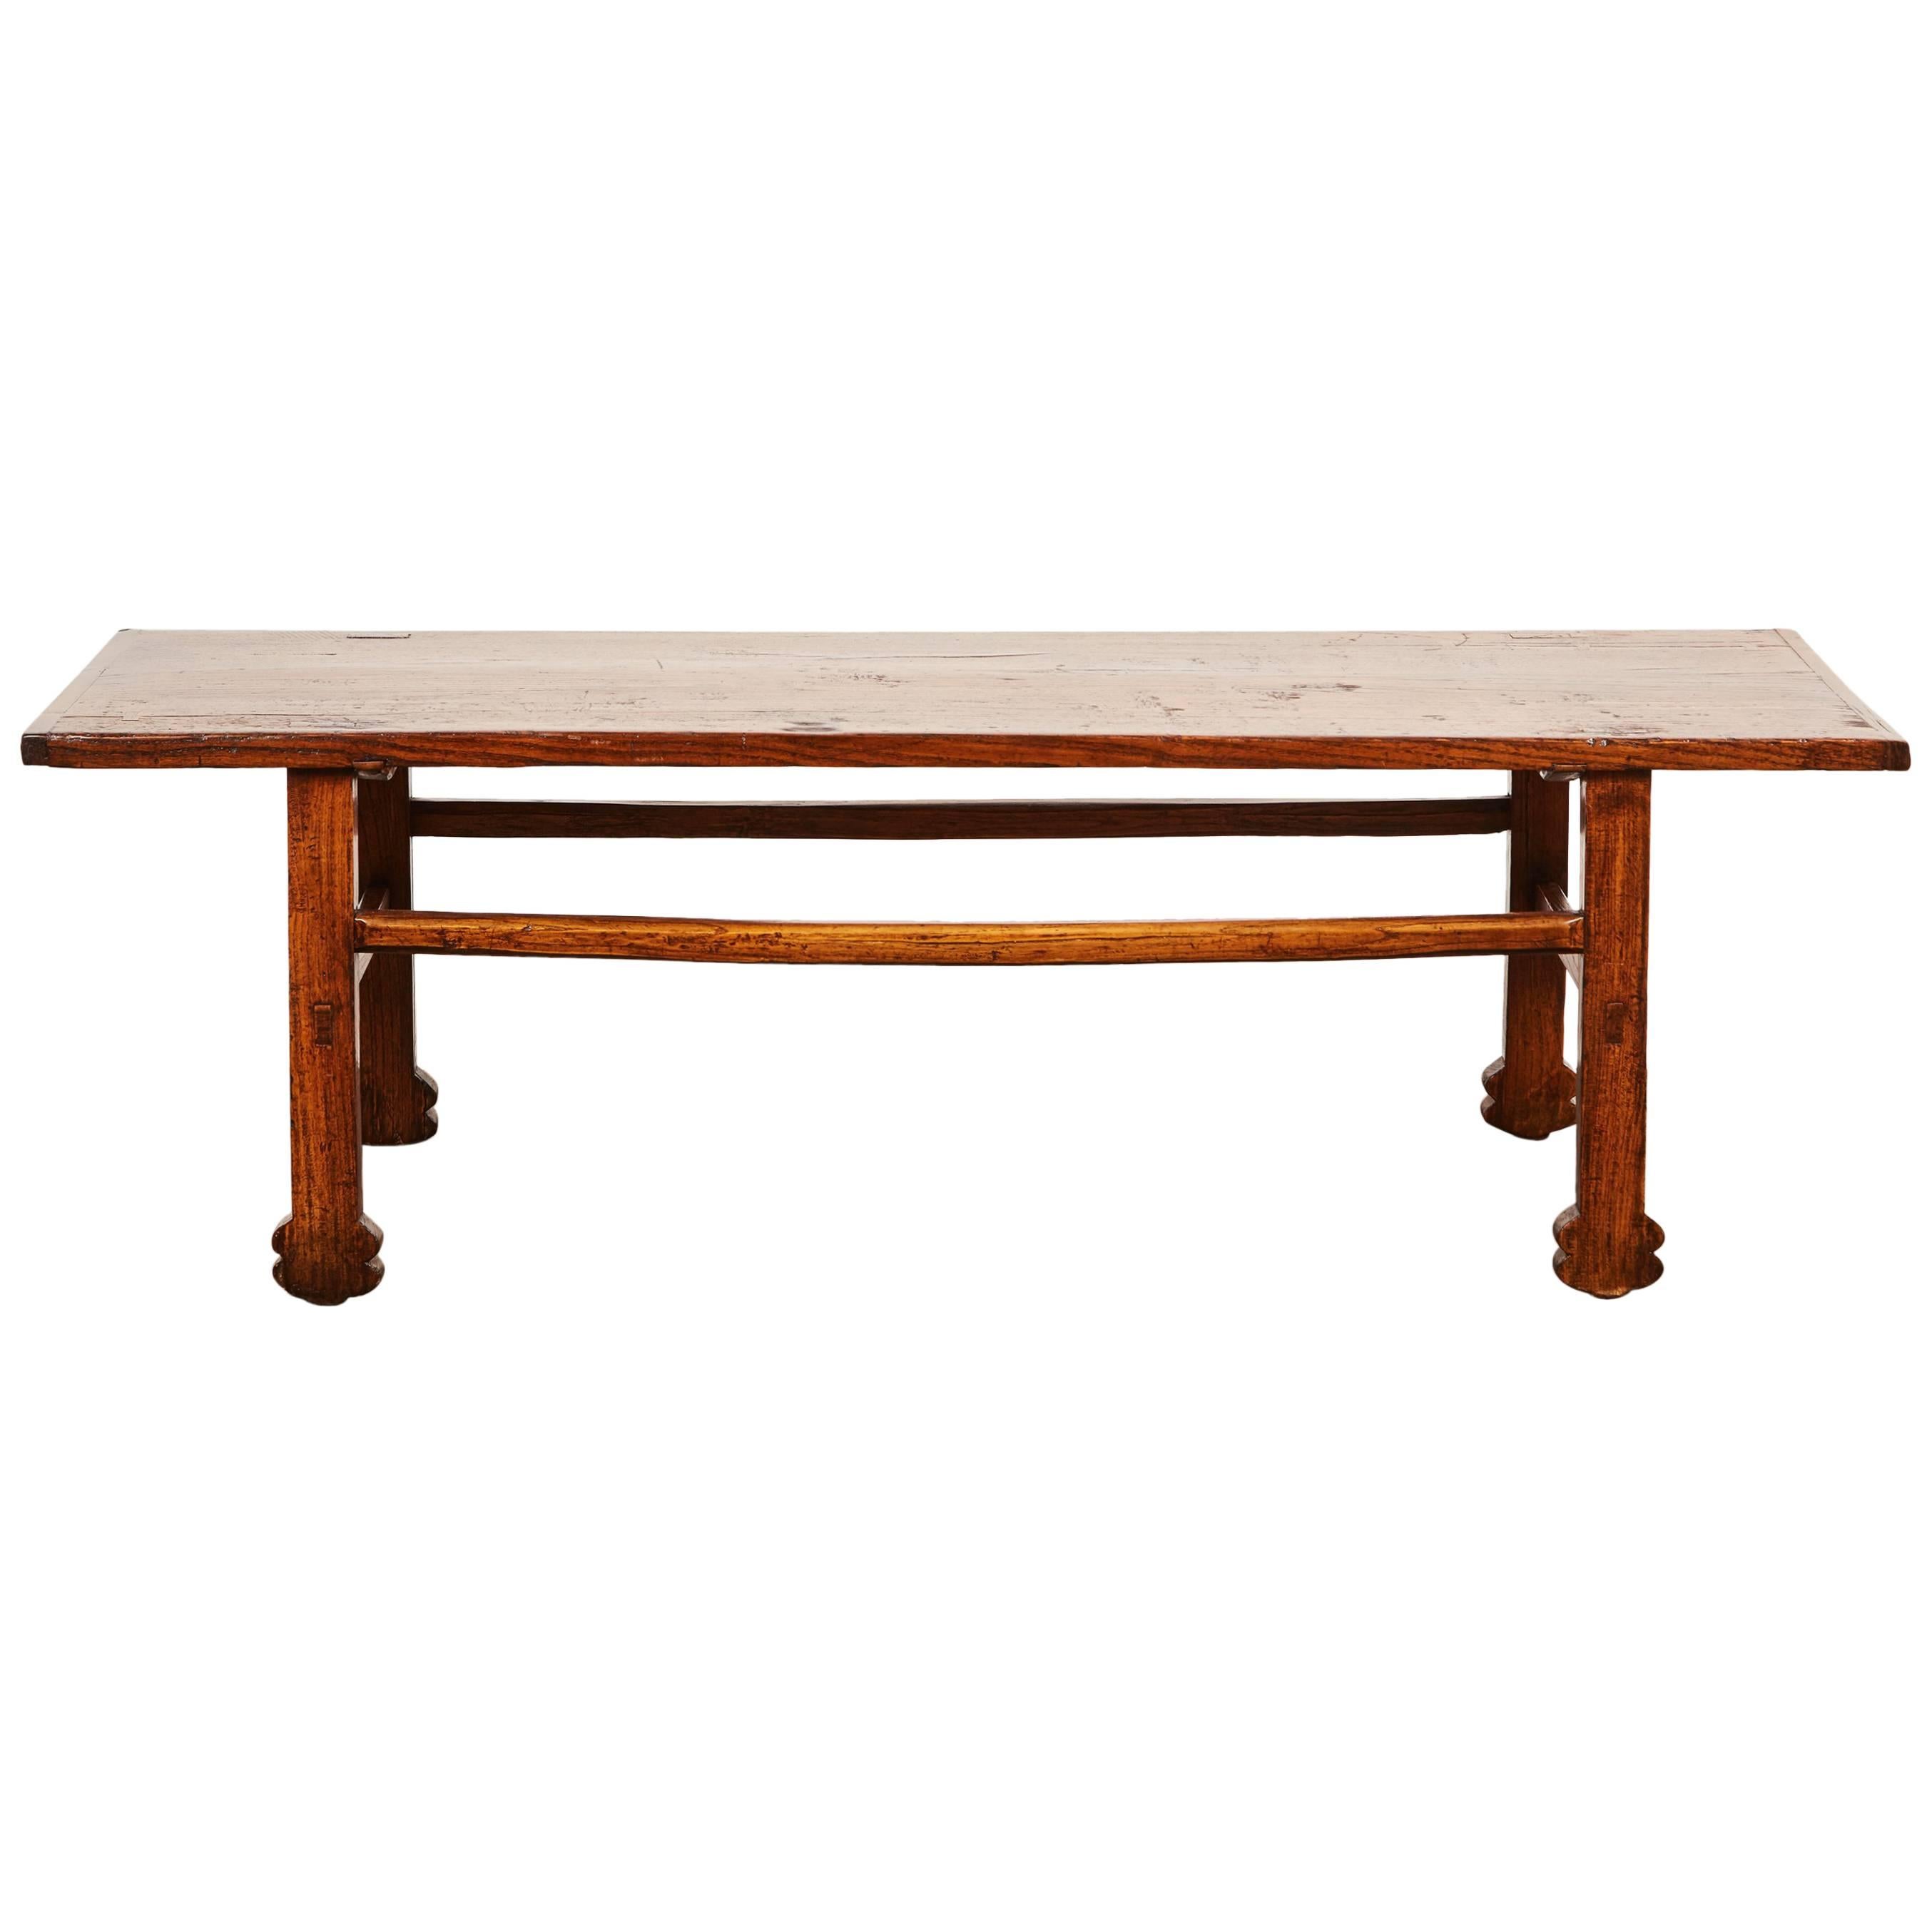 Early 19th Century Chinese Elm Table For Sale